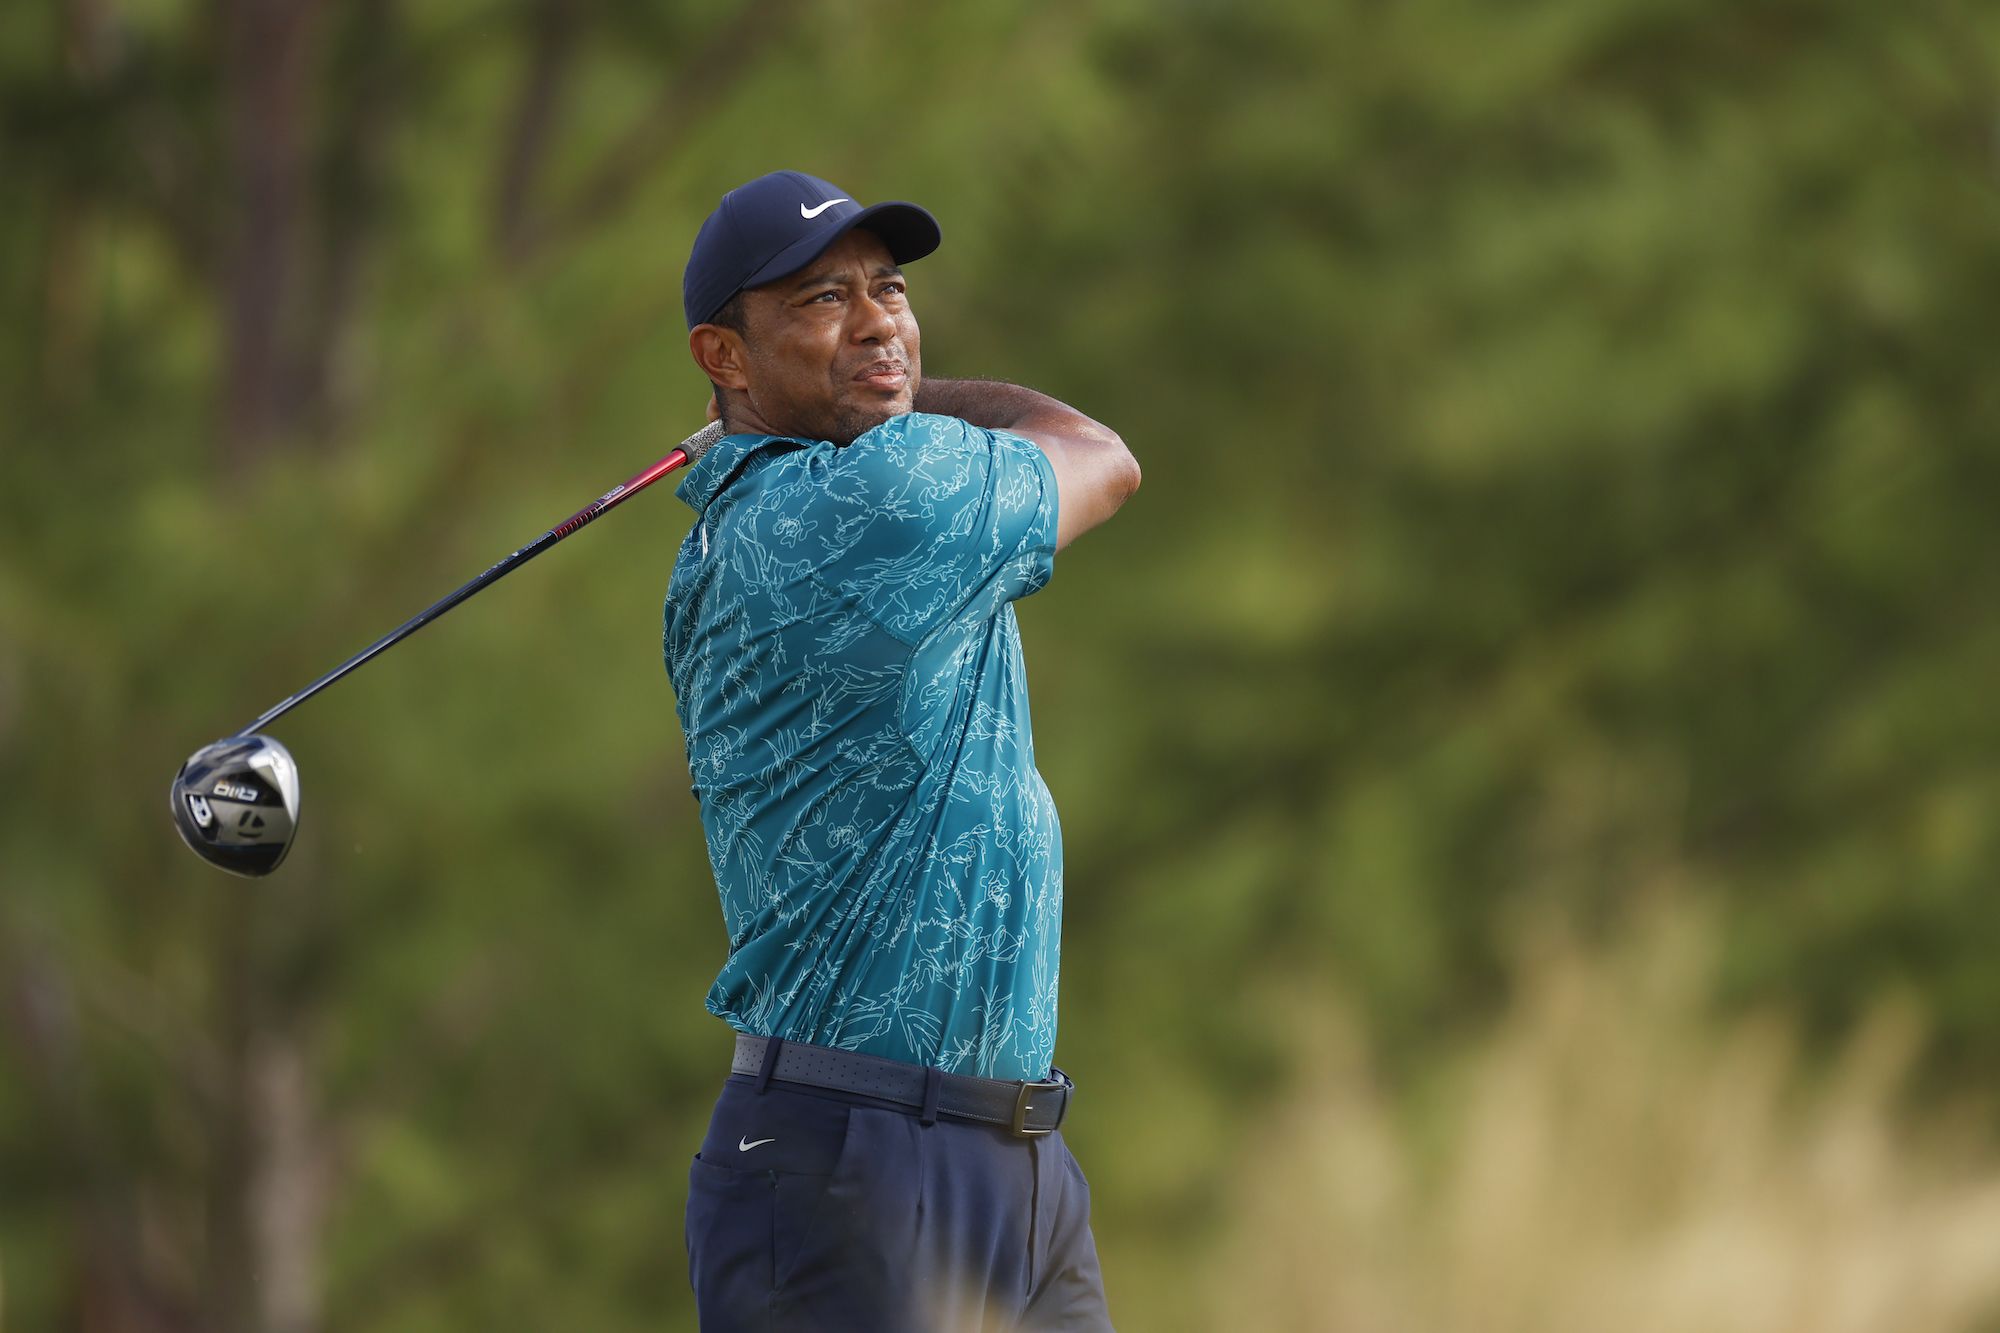 Tiger Woods improves on day two of his long-awaited return to golf